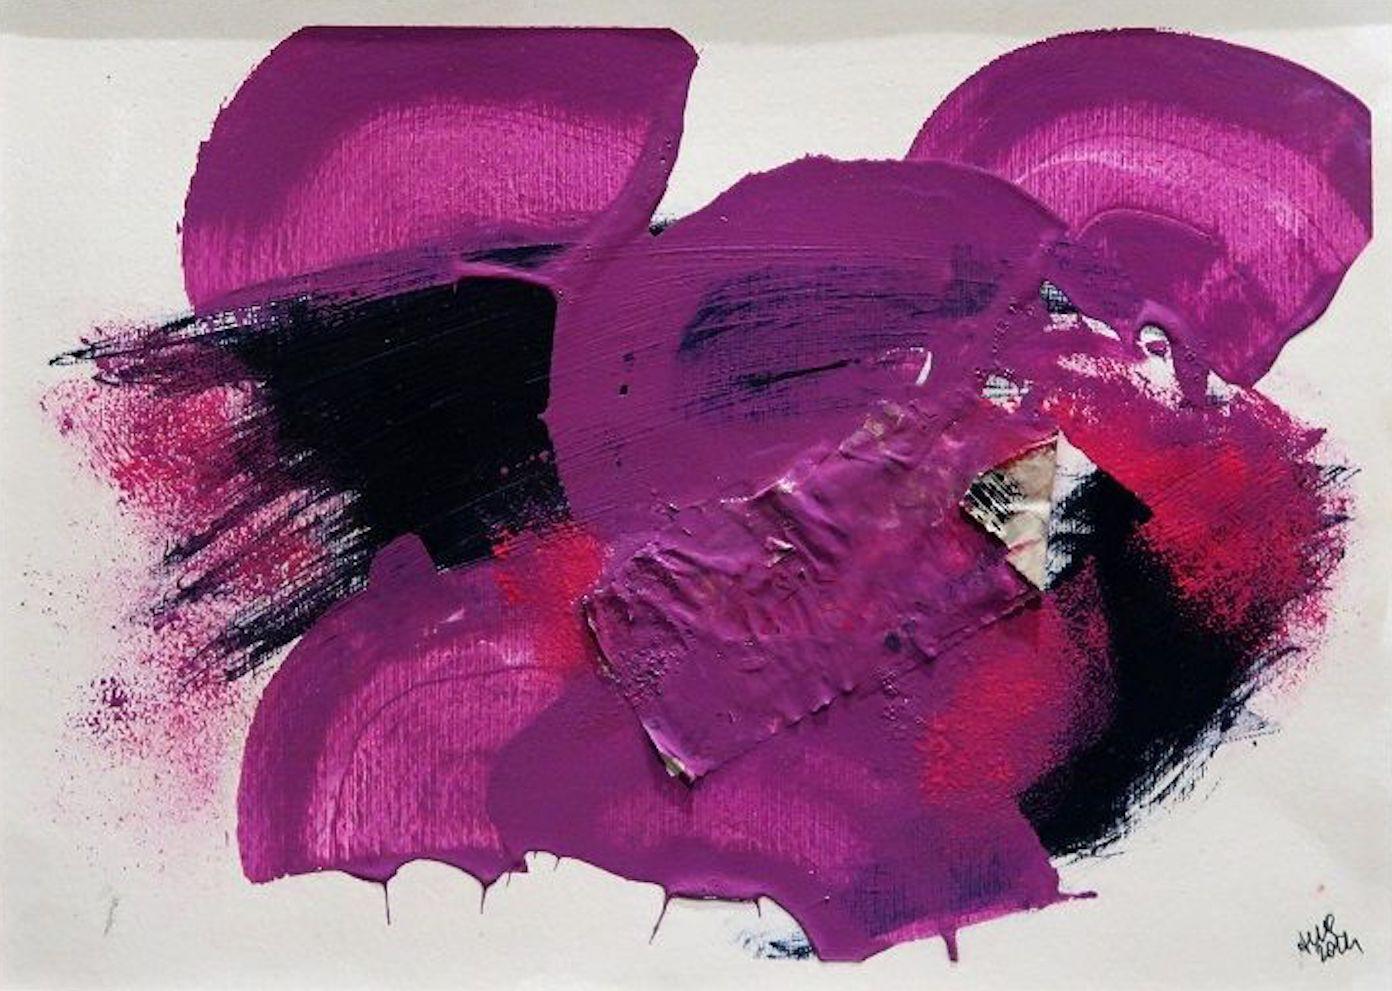 Anna Maria Caboni Abstract Painting - Pink - Acrylic by A.M. Caboni - 2014